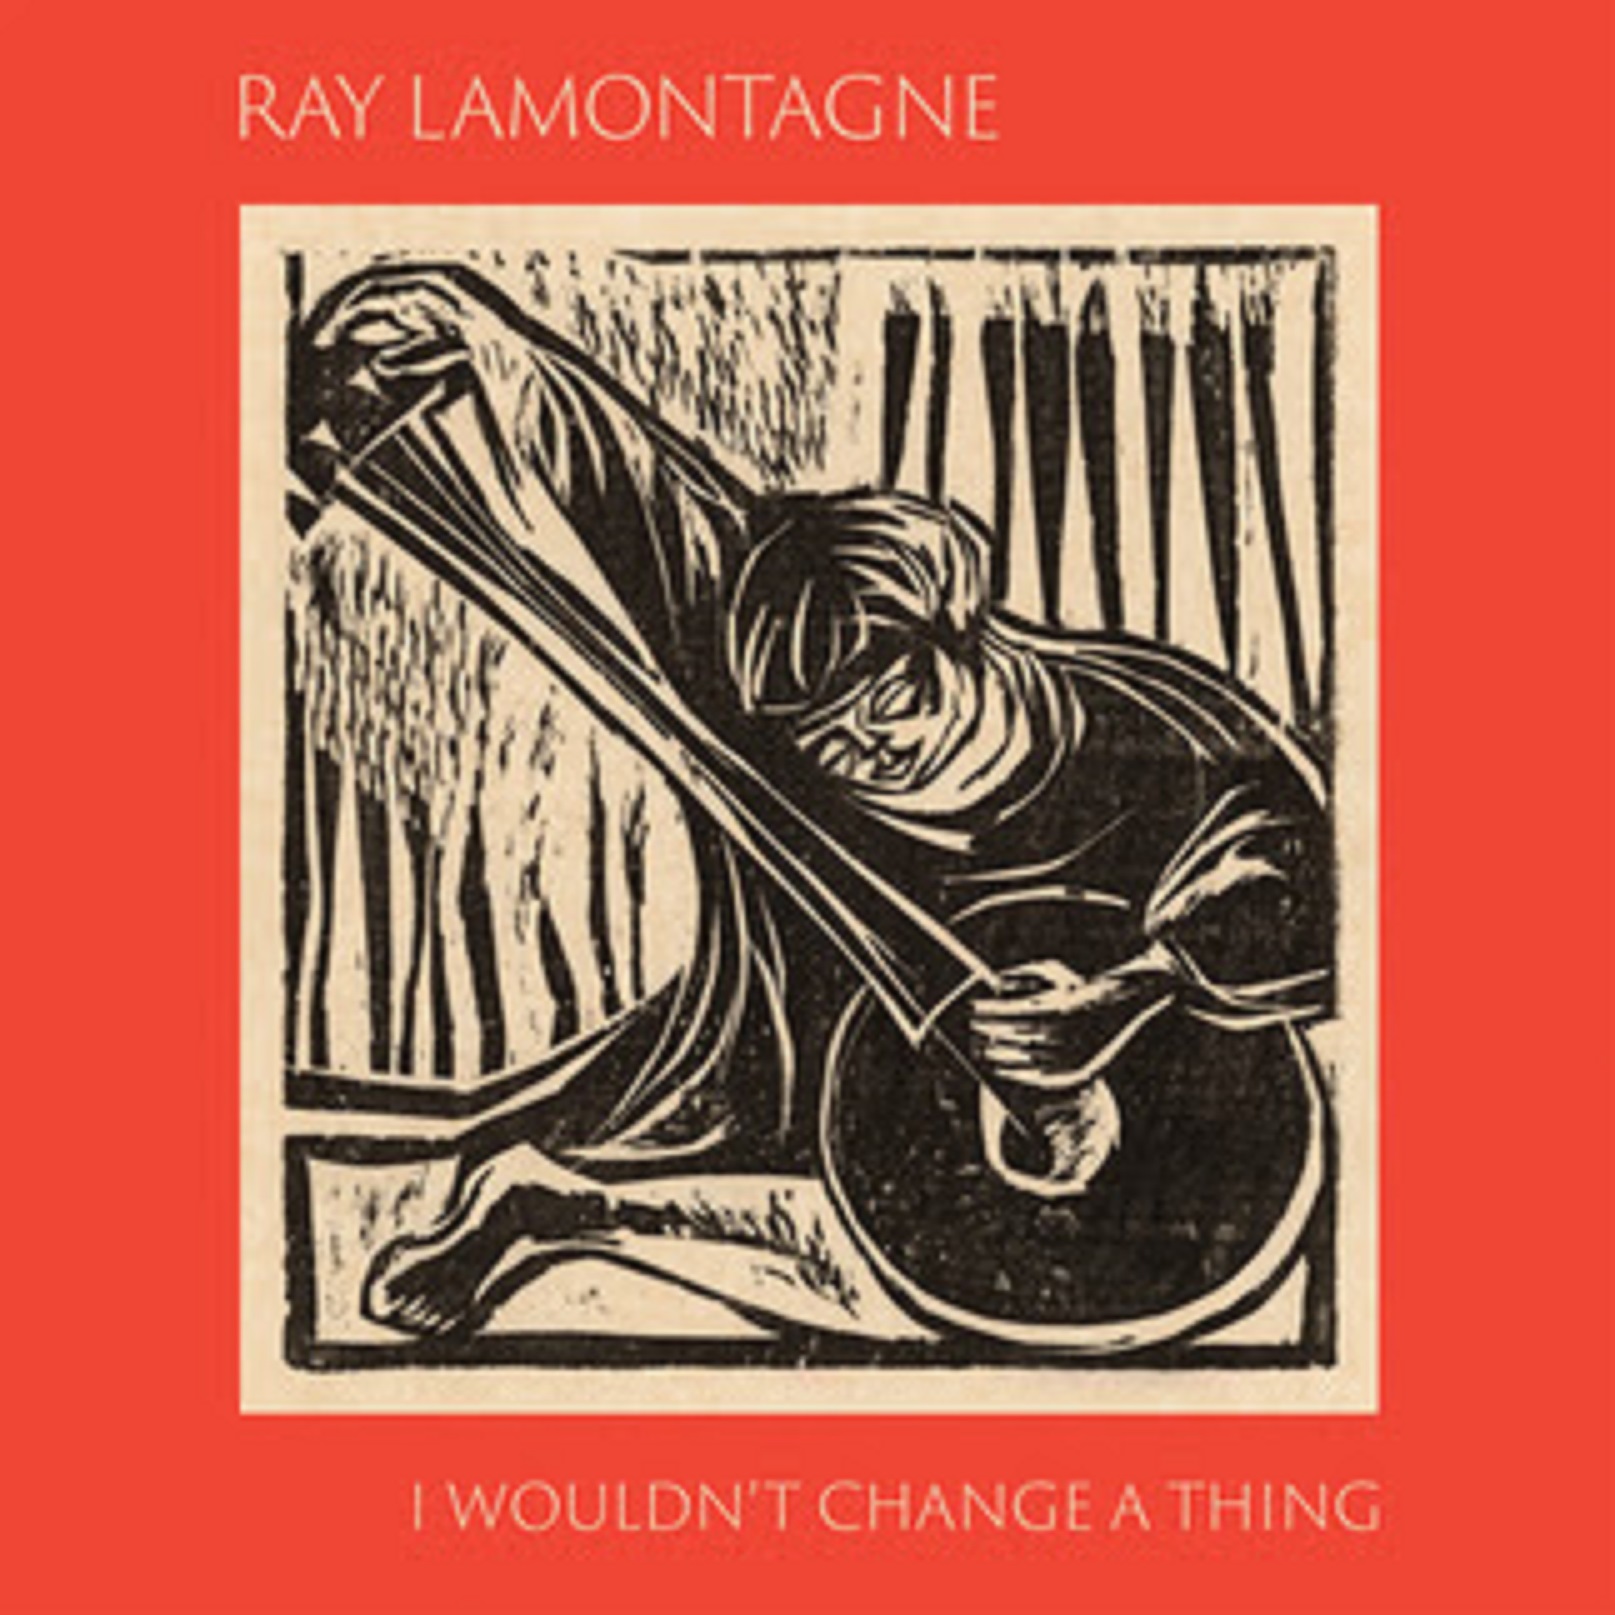 Ray LaMontagne unveils third single "I Wouldn't Change A Thing" taken from highly anticipated studio album 'Long Way Home' out August 16